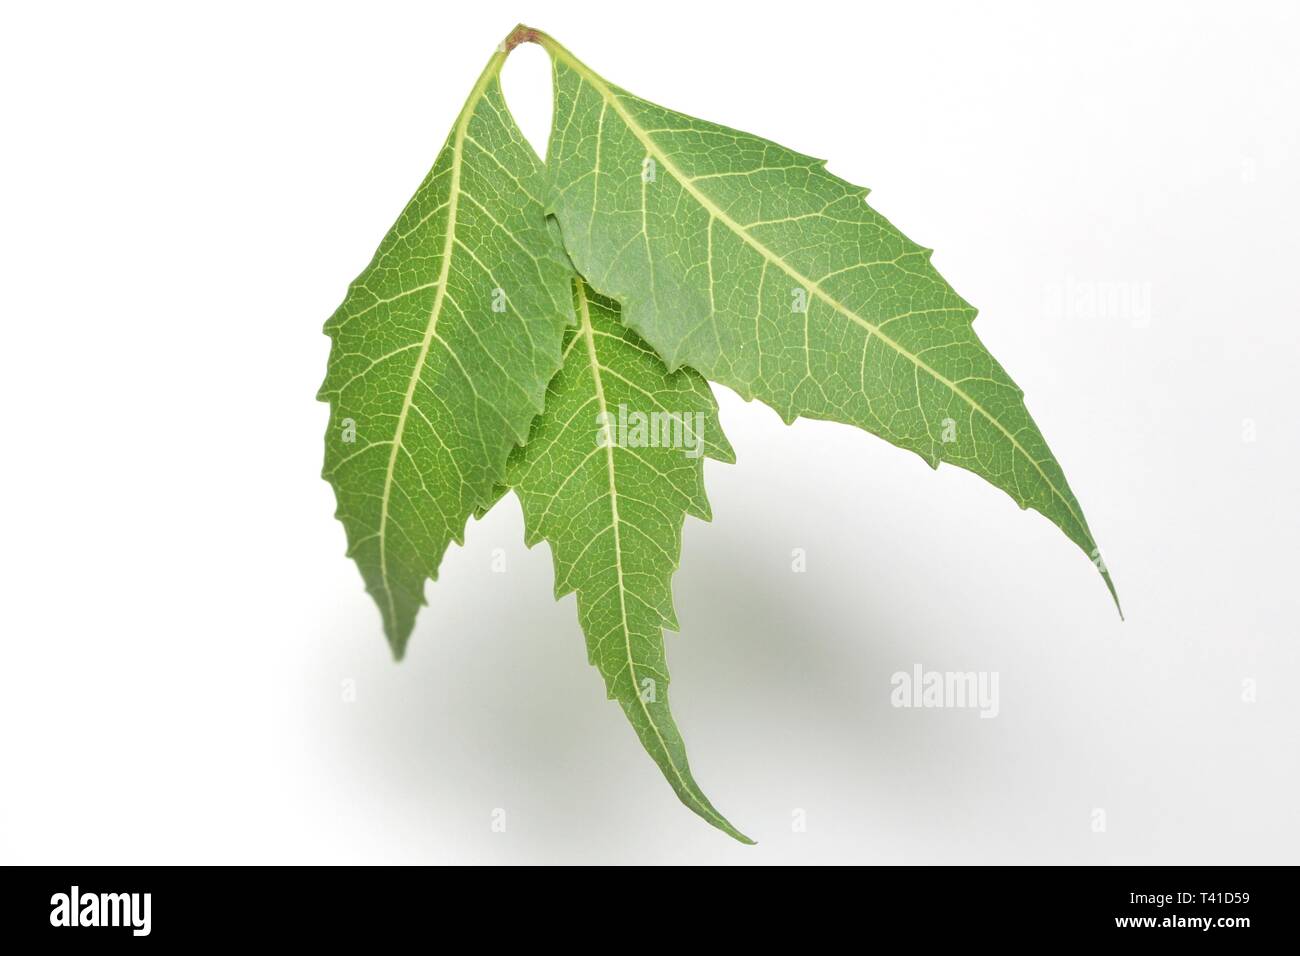 Medicinal neem (Azadirachta indicia) leaves over isolated white background Stock Photo